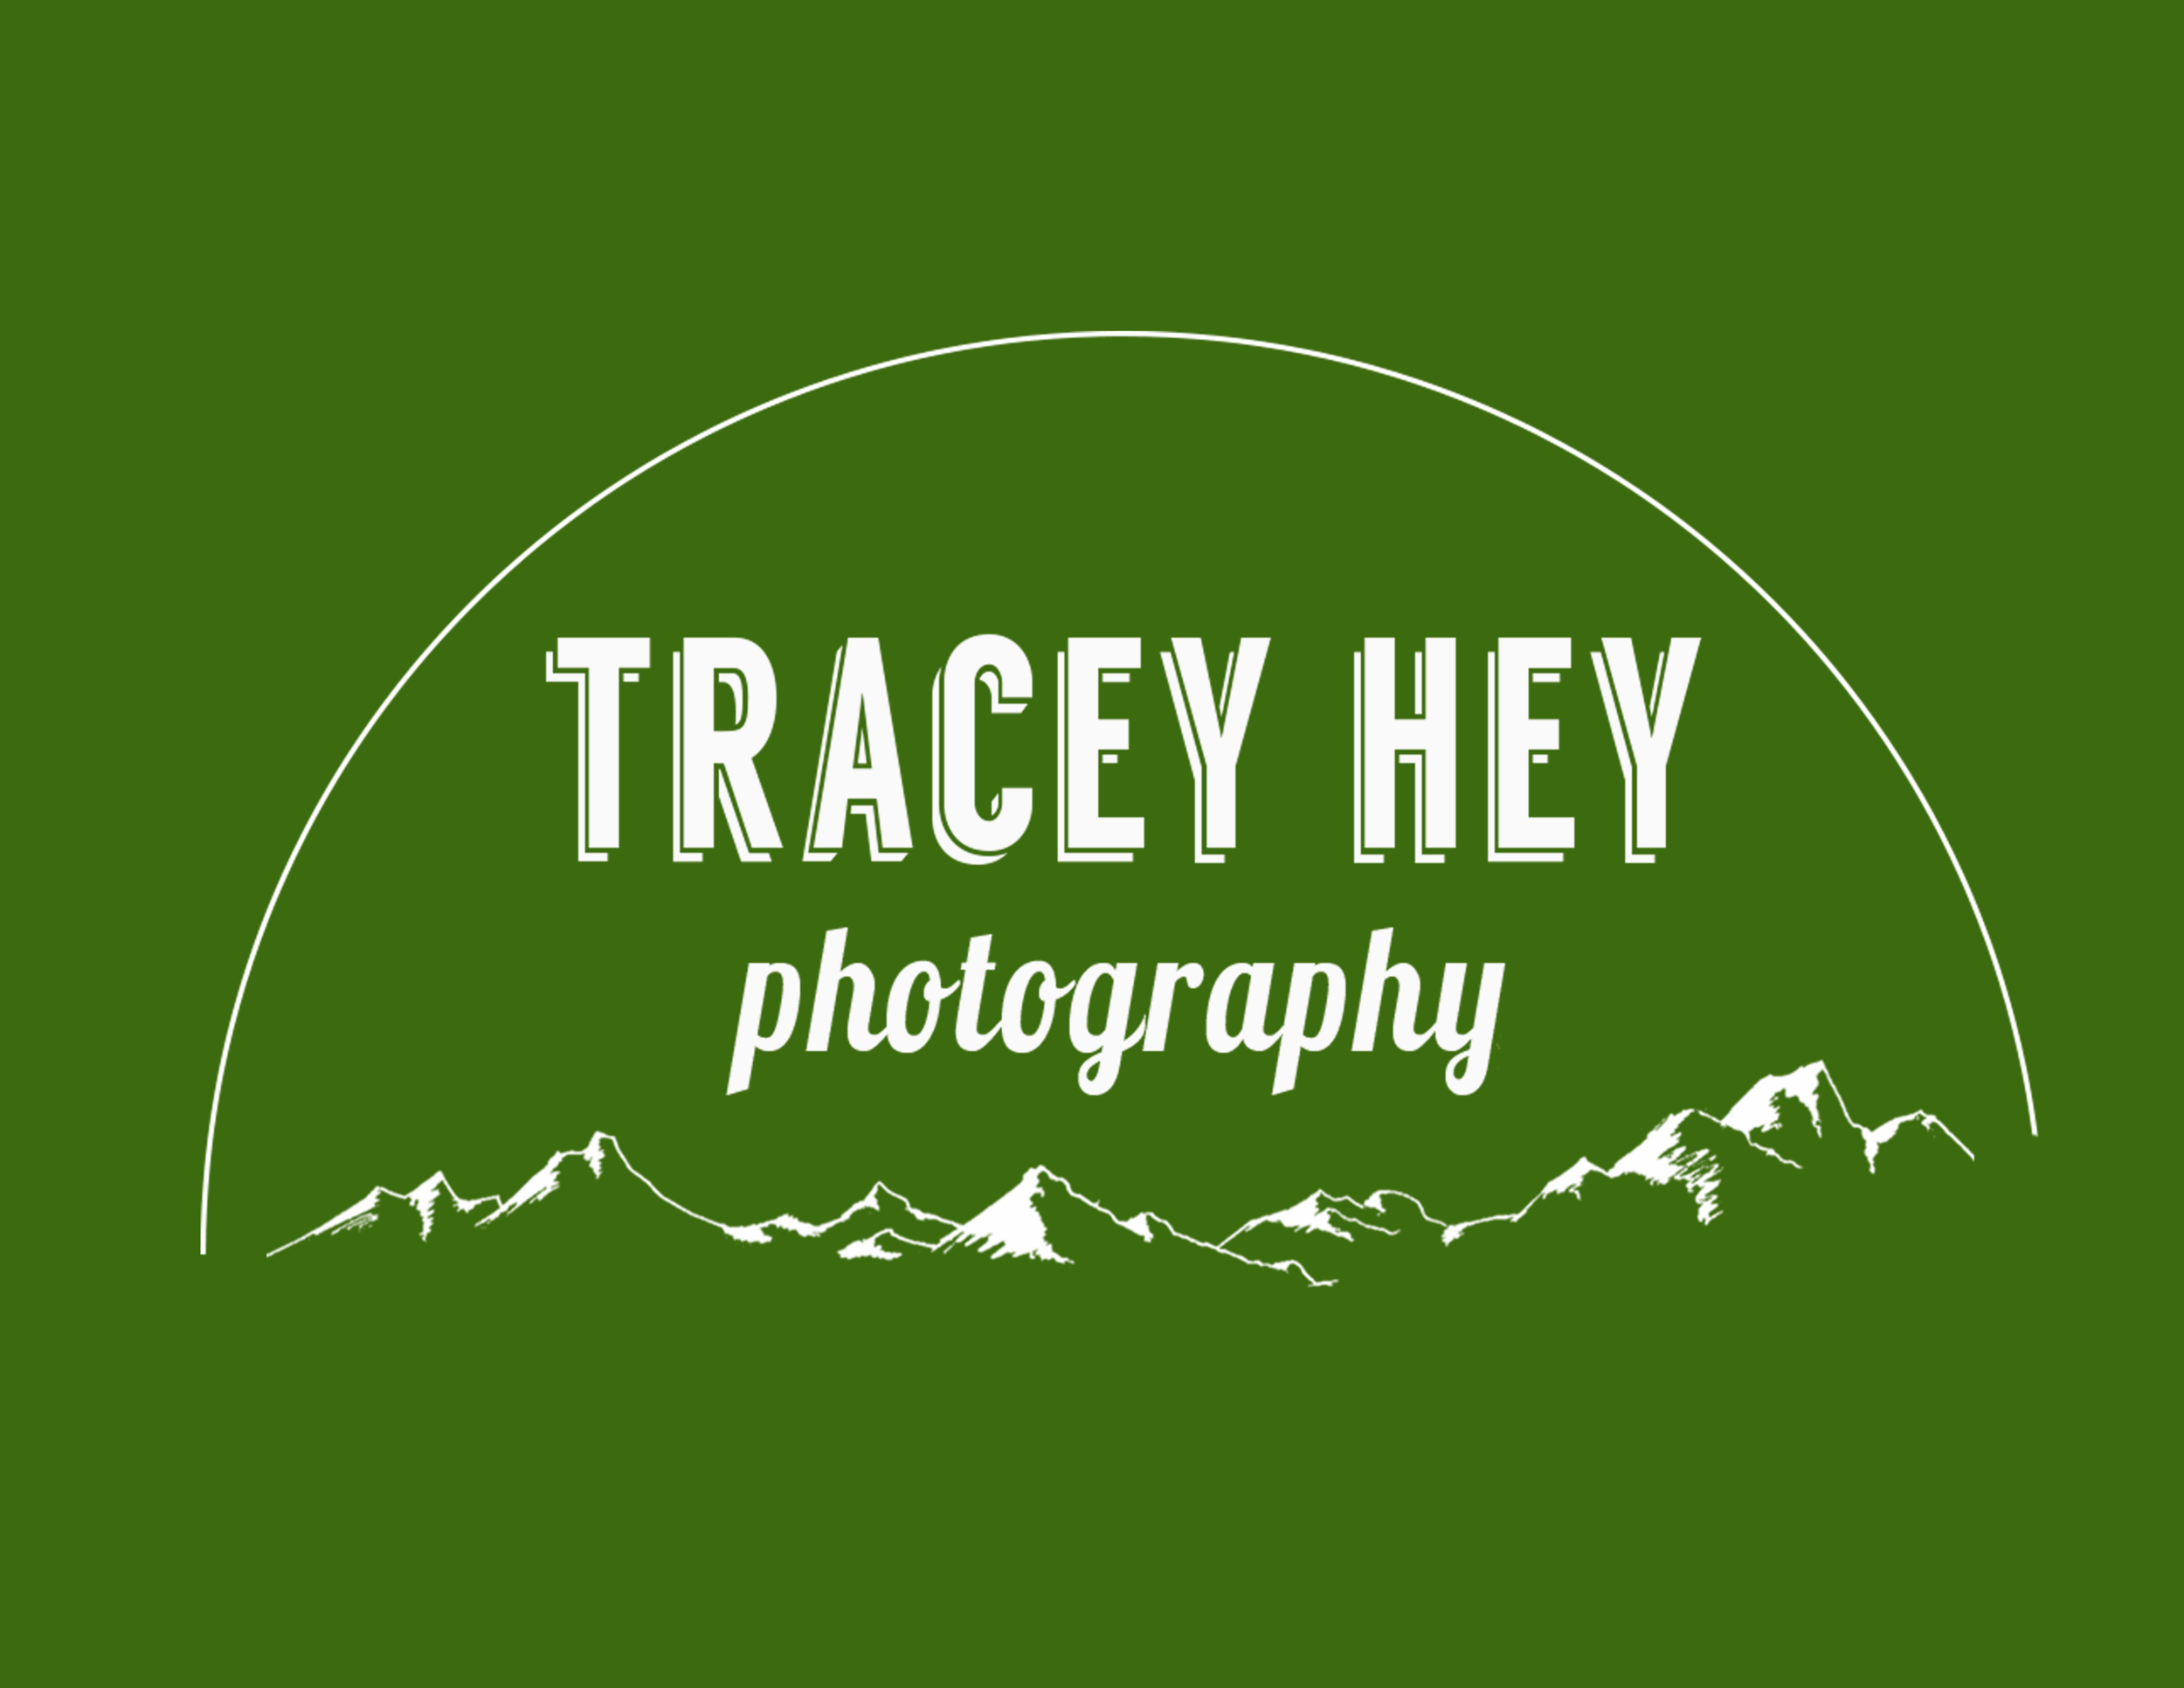 Tracey Hey Photography